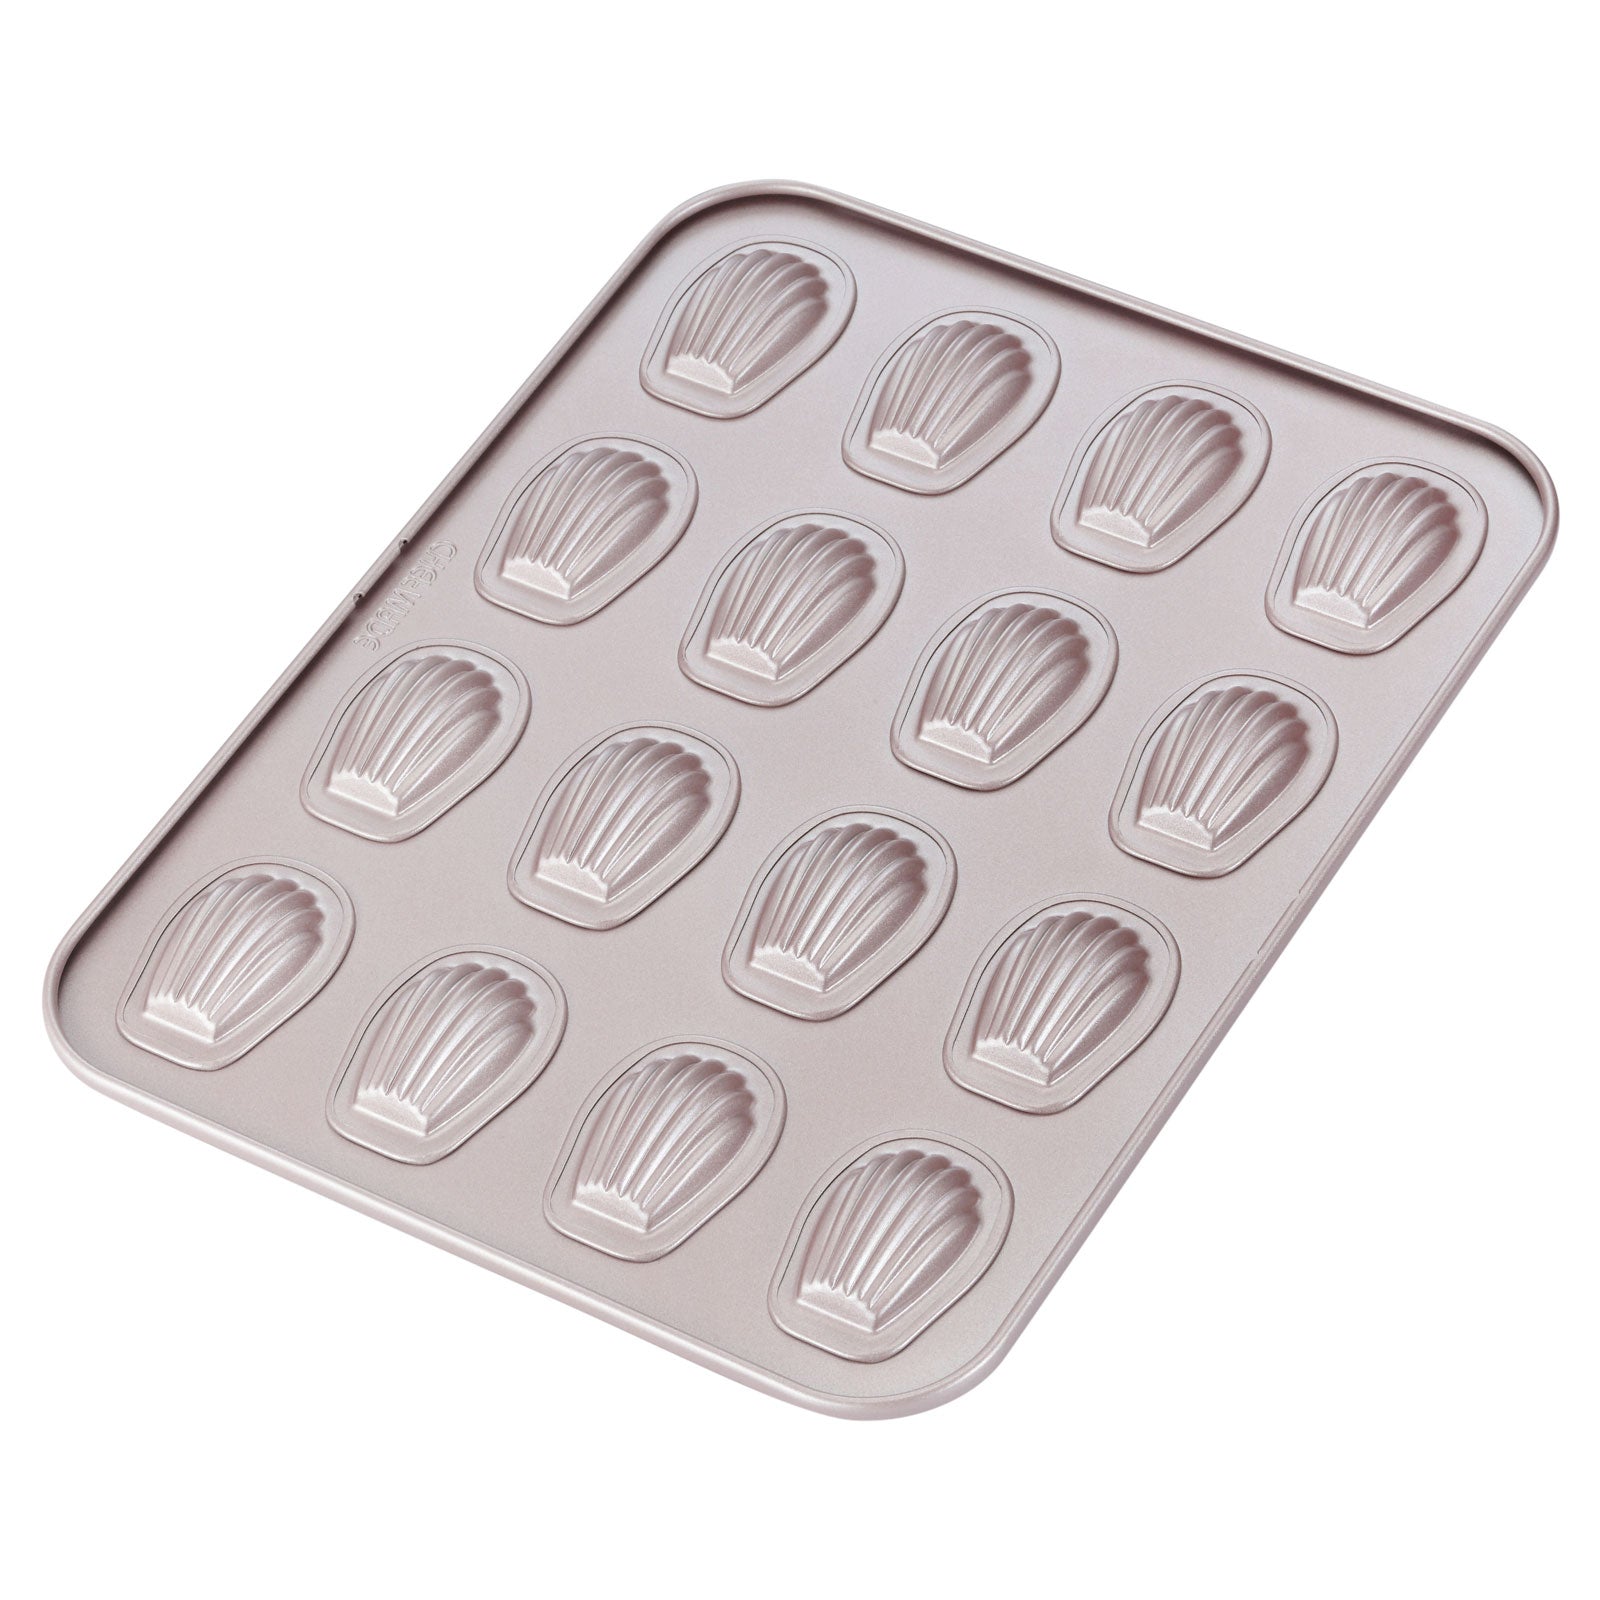 Mini Financier Cake Pan Rectangle 8 Well - CHEFMADE official store